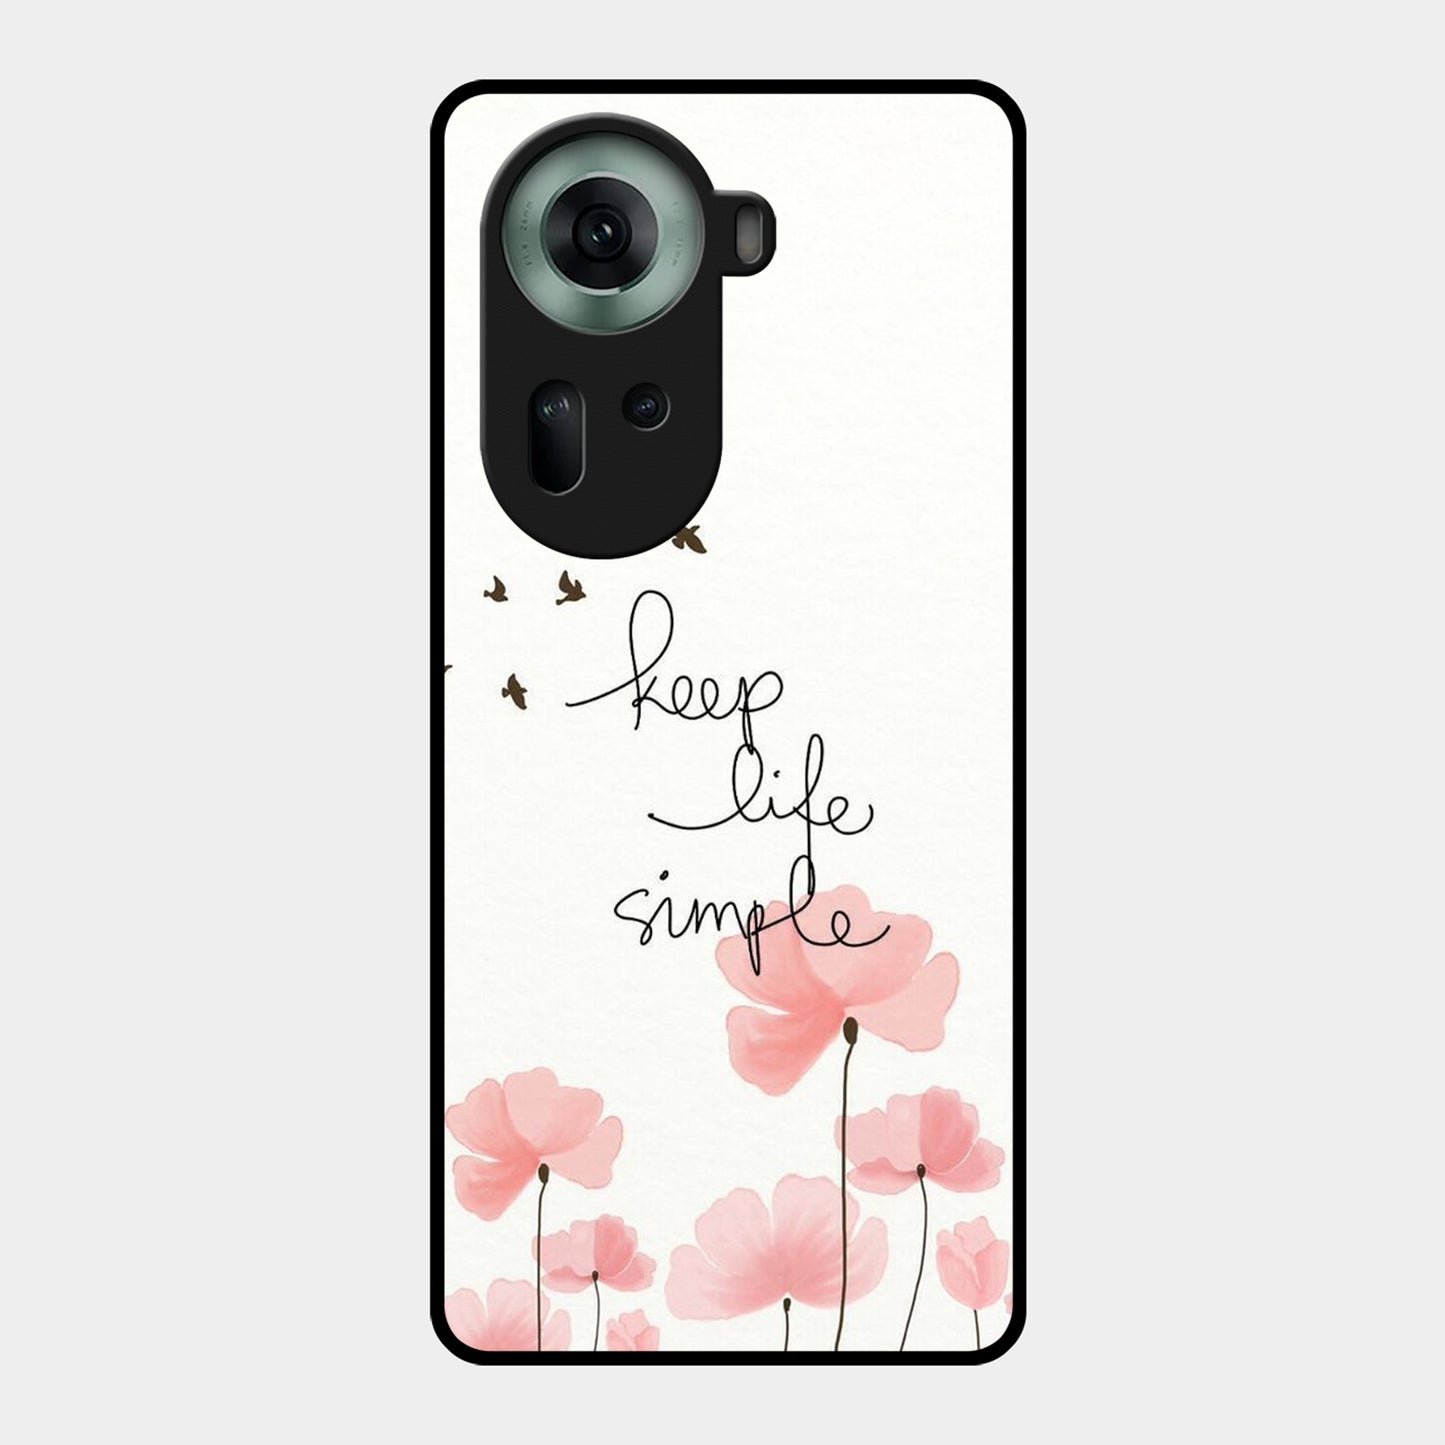 Keep Life Simple Glossy Metal Case Cover For Oppo